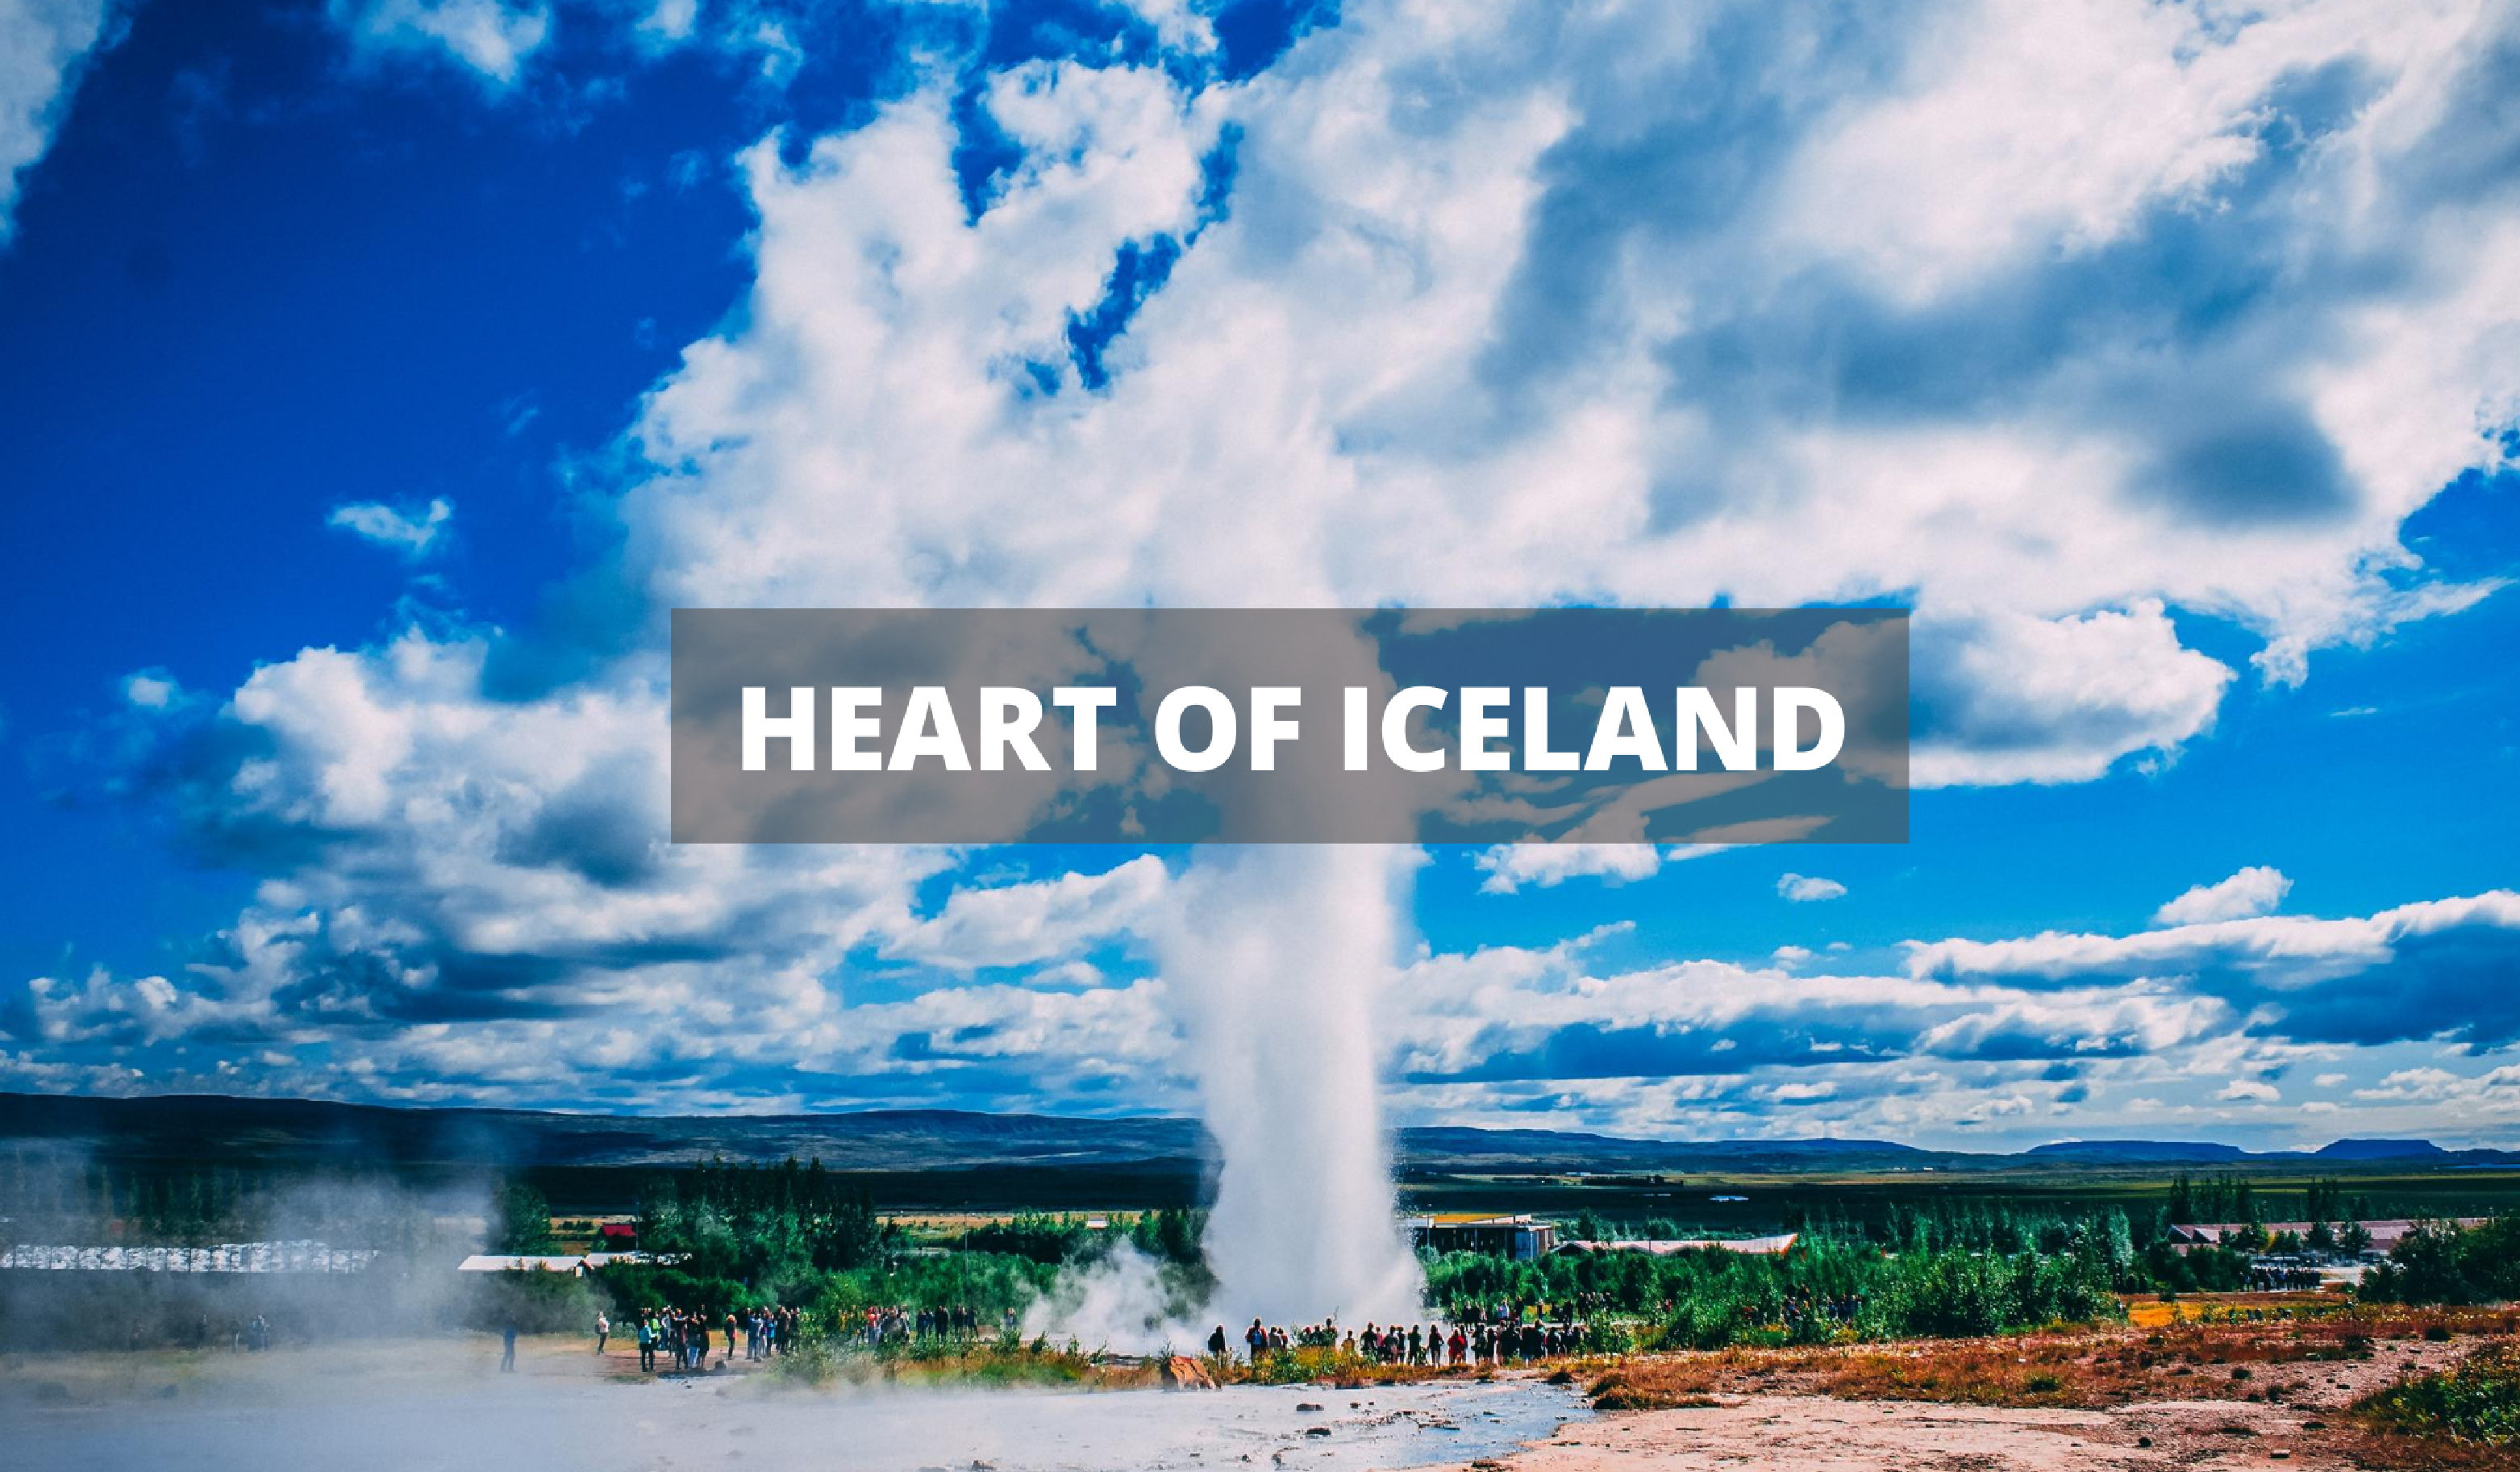 HEART OF ICELAND